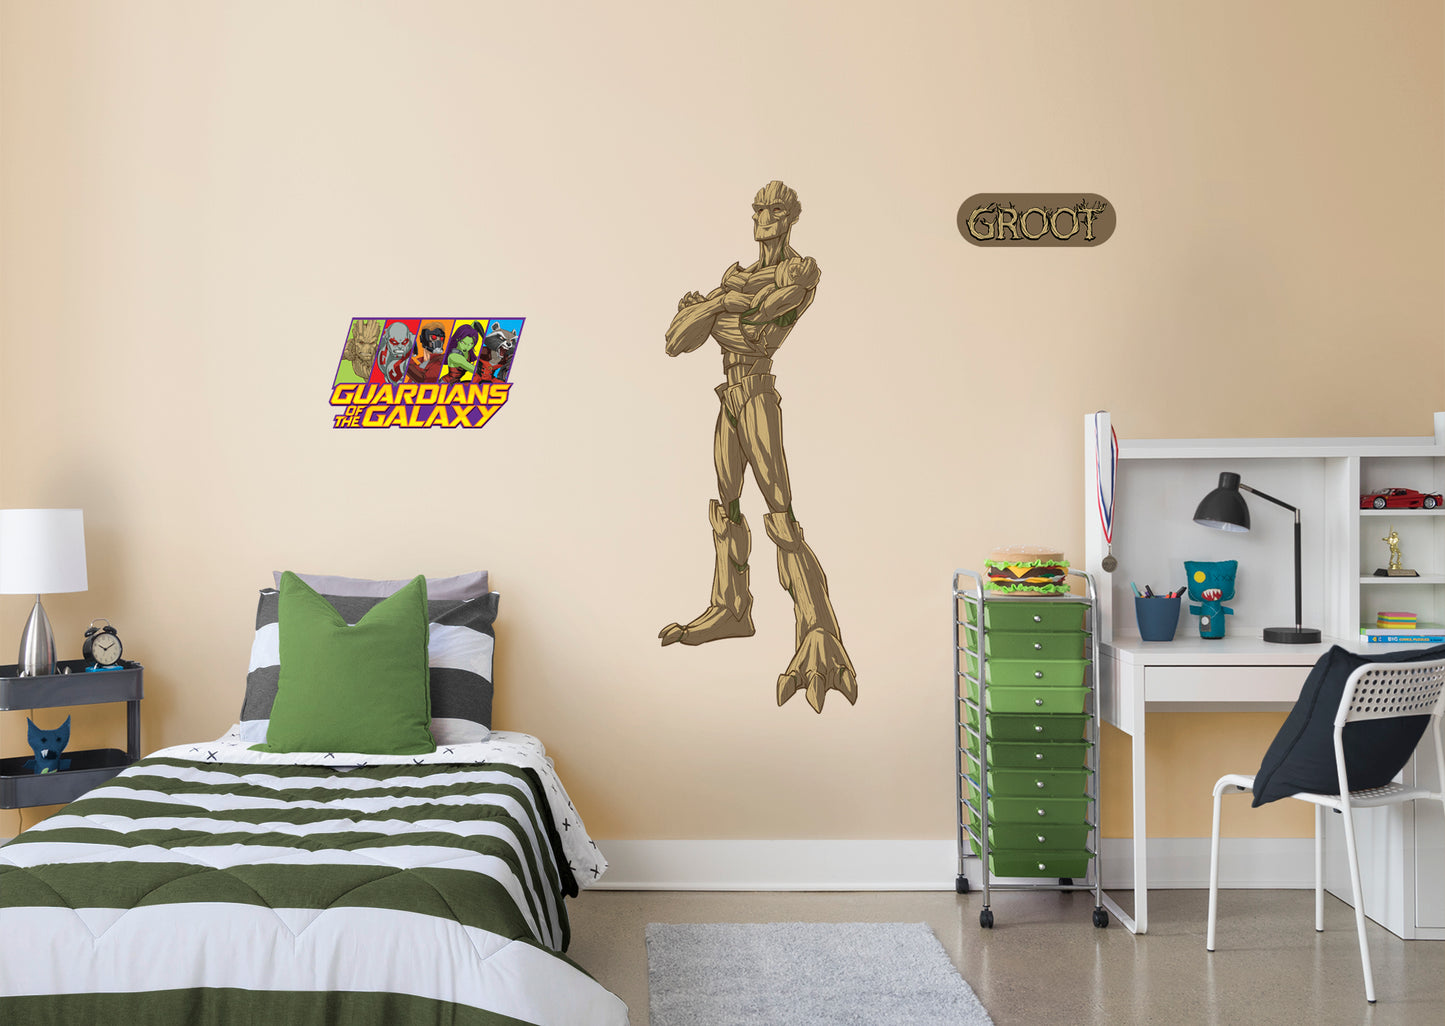 Guardians of the Galaxy Groot RealBig        - Officially Licensed Marvel Removable Wall   Adhesive Decal